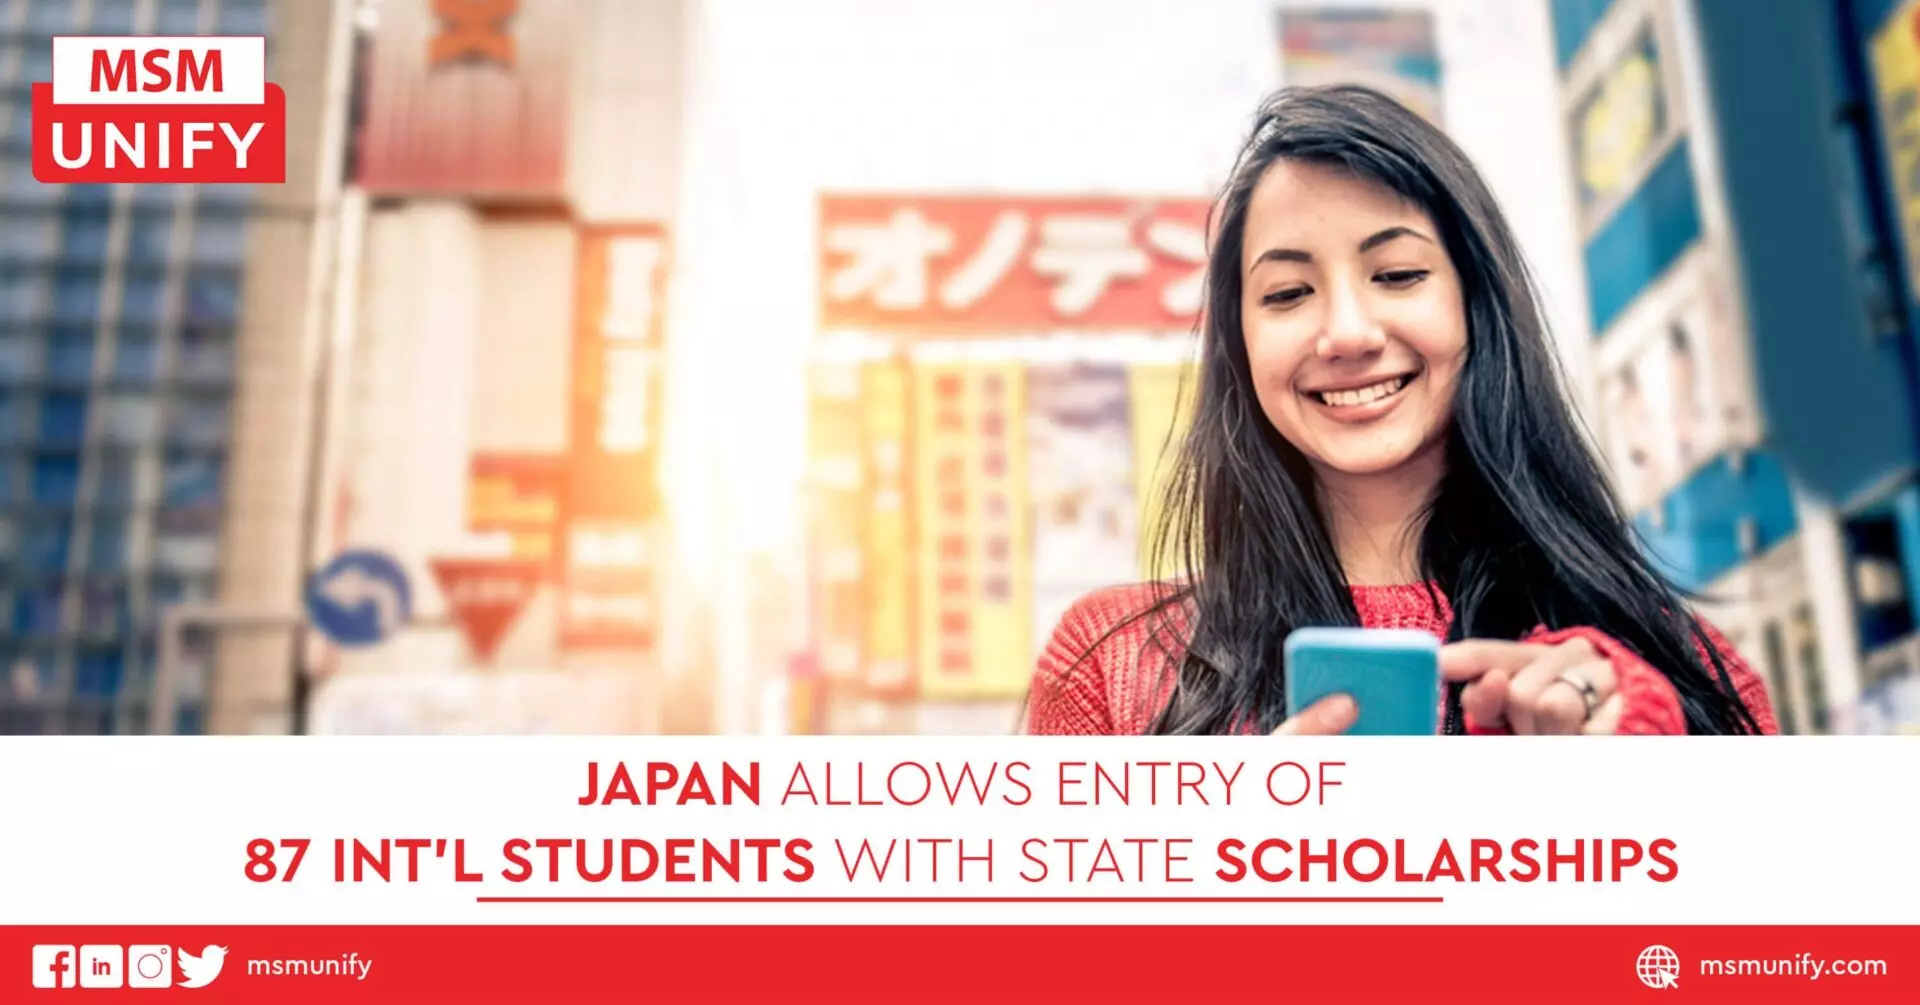 Japan Allows Entry of 87 Intl Students With State Scholarships scaled 1